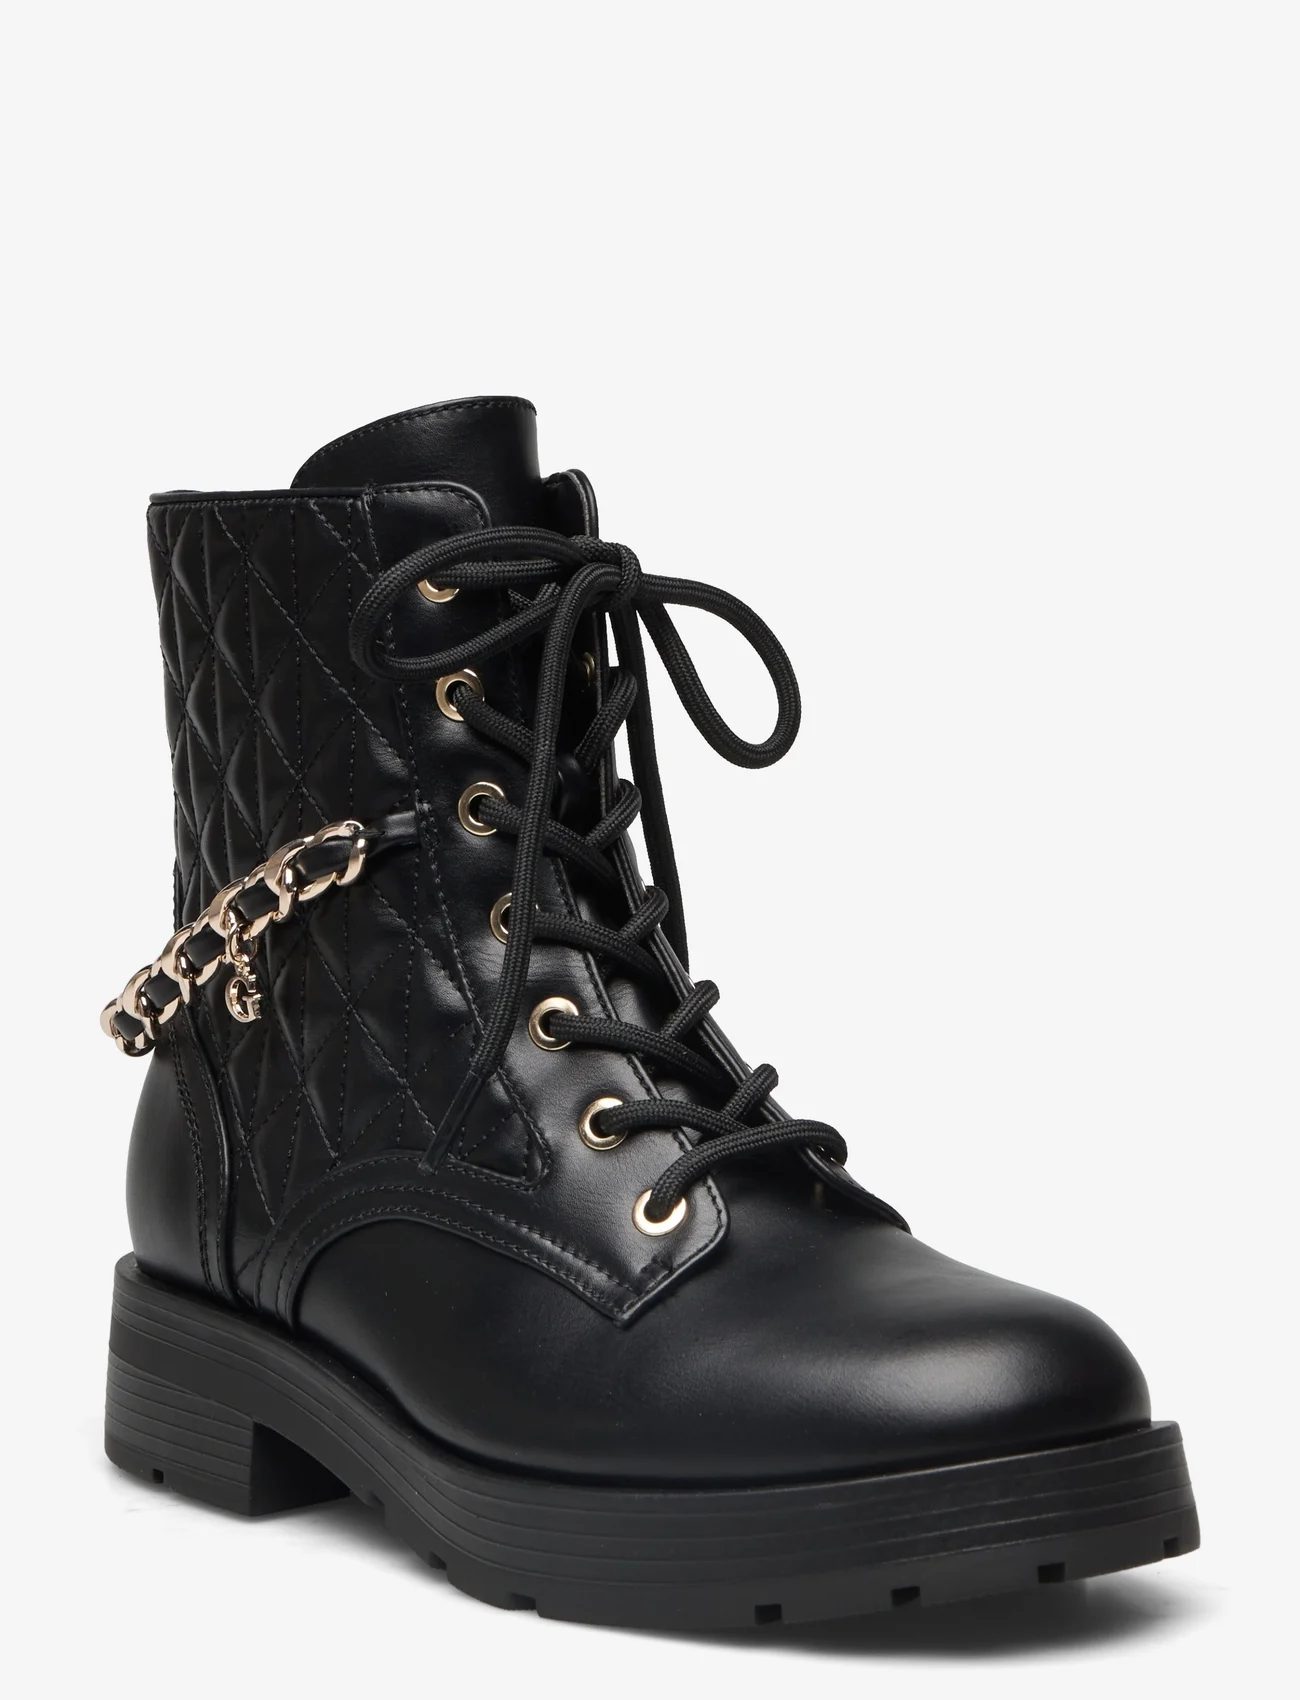 GUESS - XENIA - laced boots - black - 0